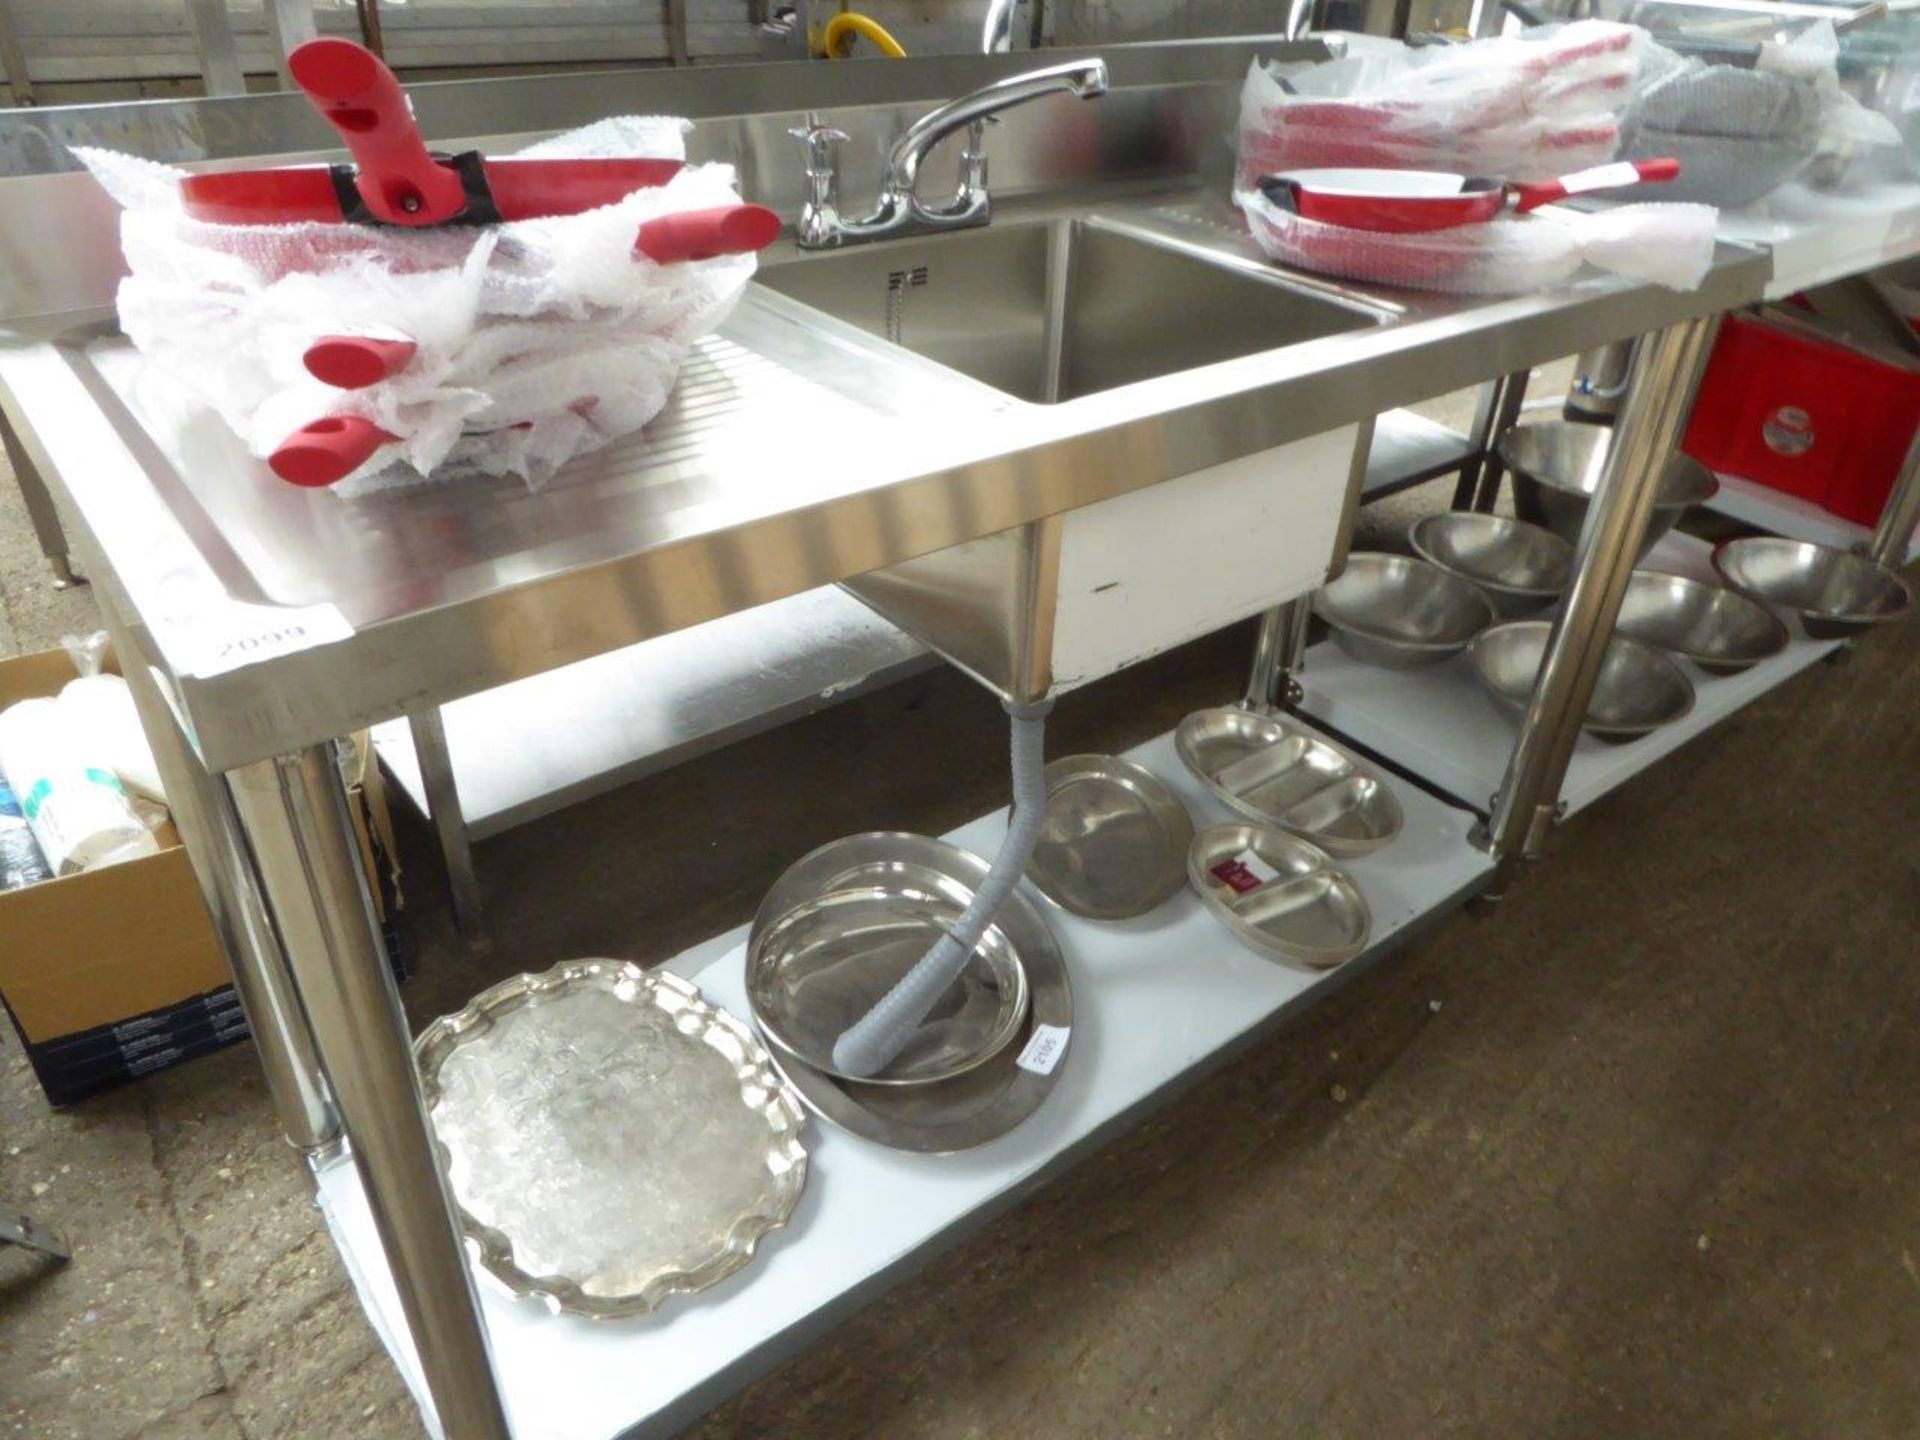 150cm centre bowl double drainer with taps and shelf.